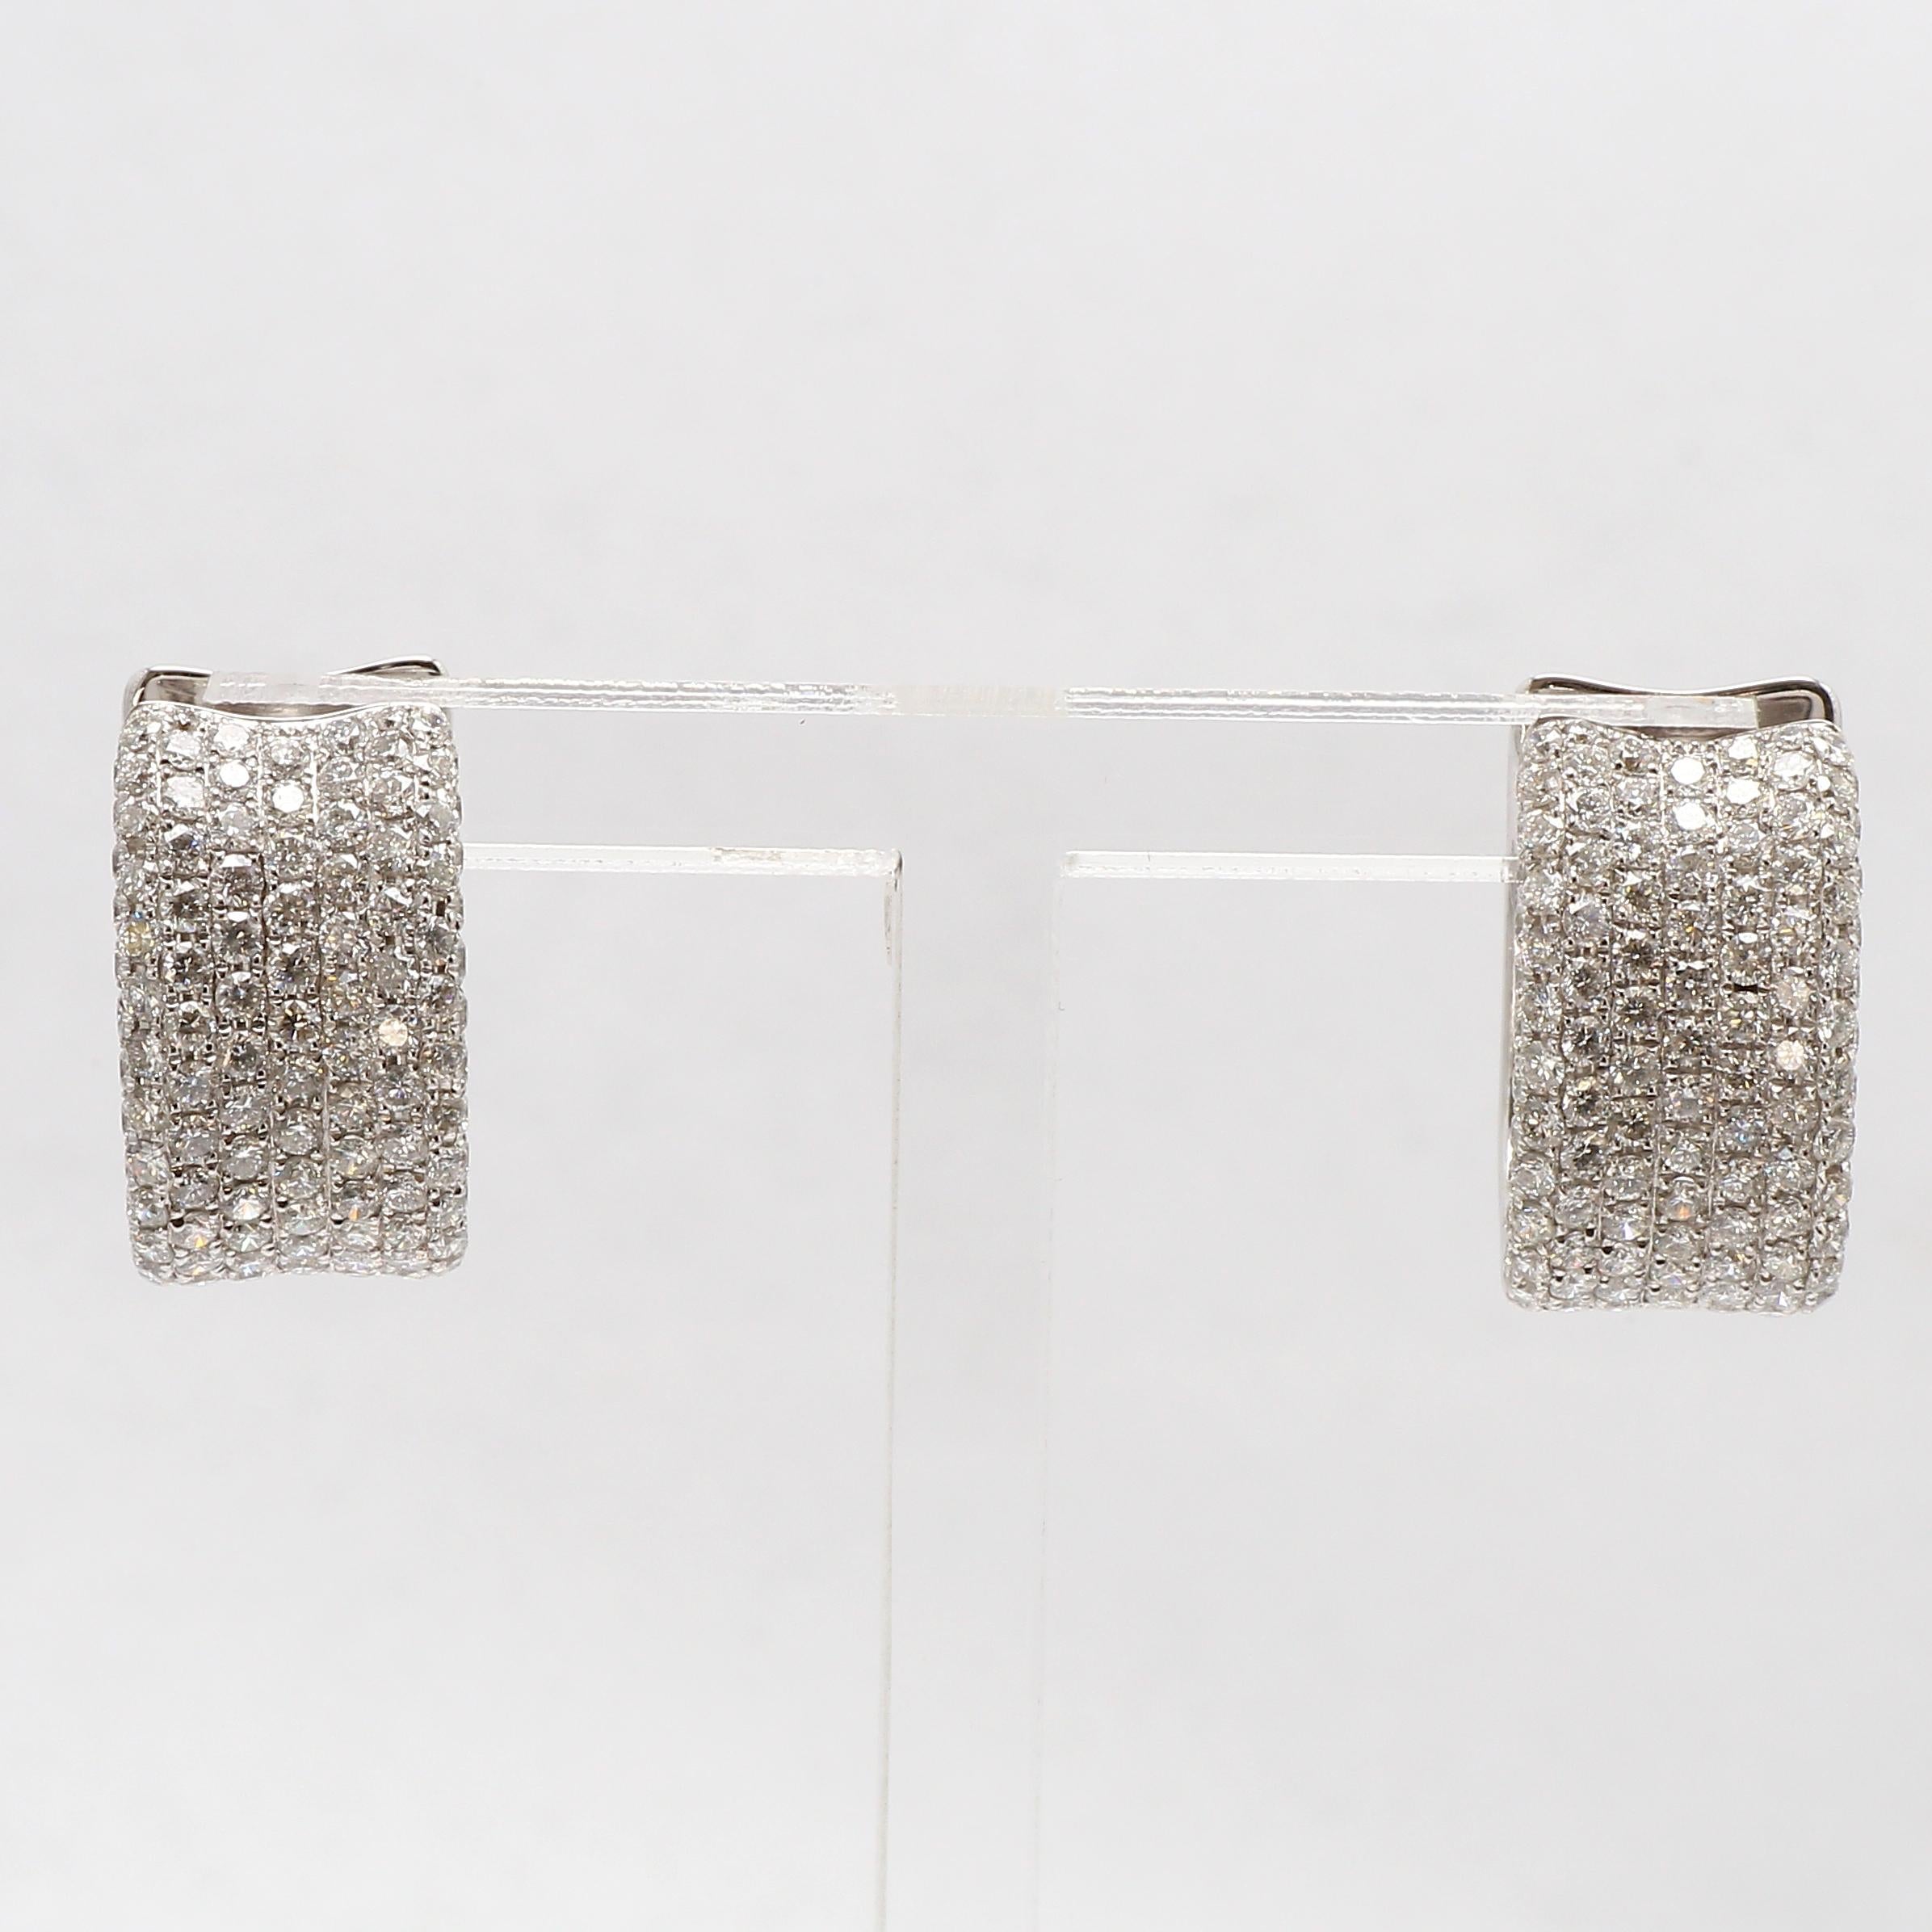 Elegantly handcrafted pair of Diamond Wrap Earrings.
Round Brilliant Cut White Diamonds totaling 2.64ct G-H Color, SI1-SI2 Clarity
Pave Set Diamond Designer Earrings.